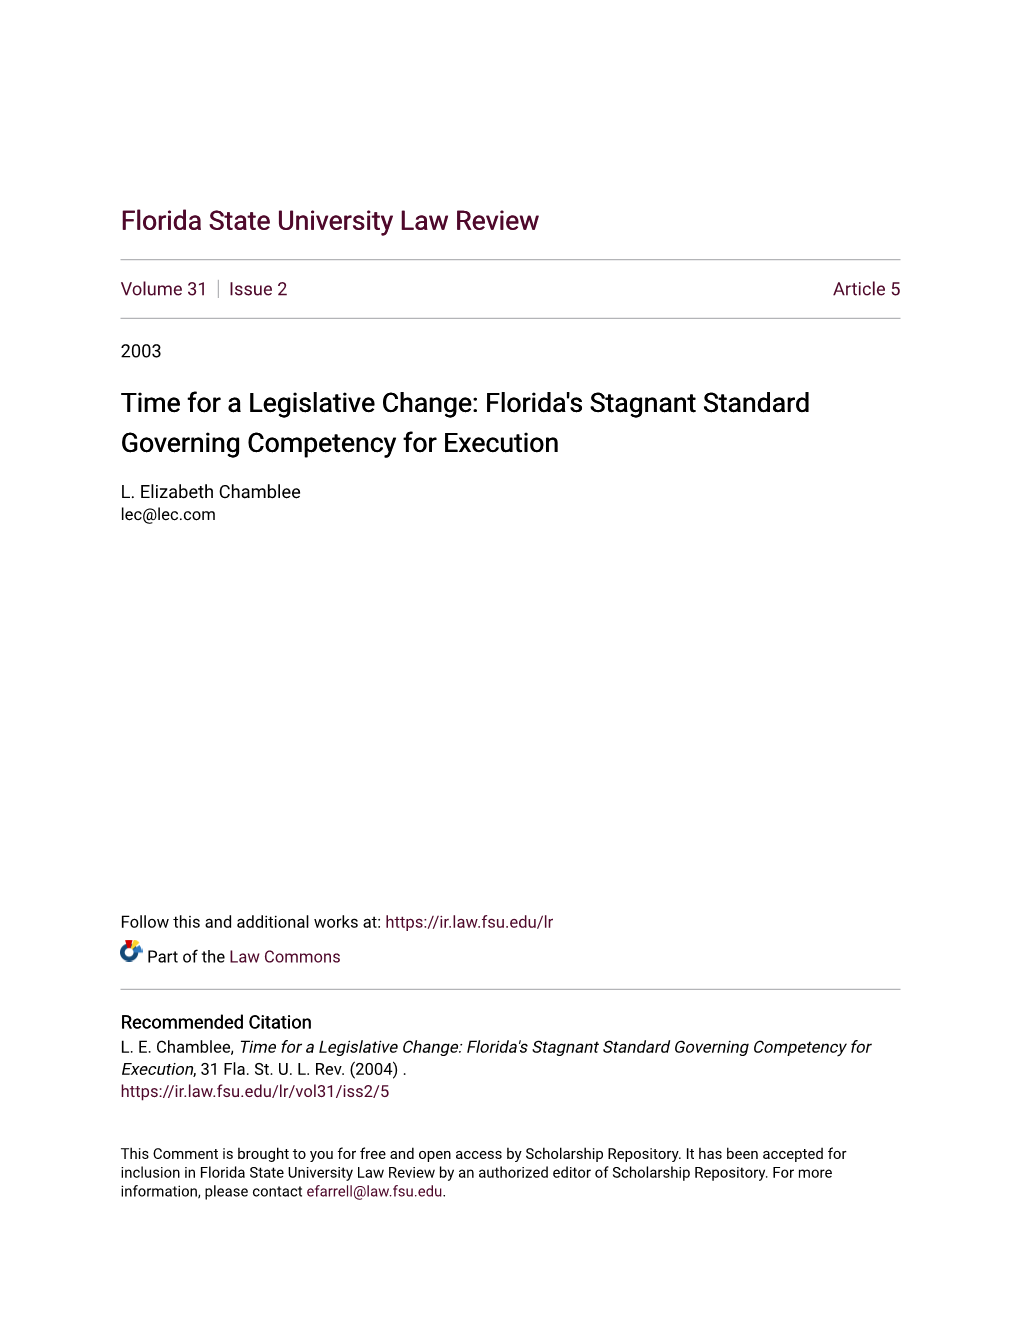 Florida's Stagnant Standard Governing Competency for Execution